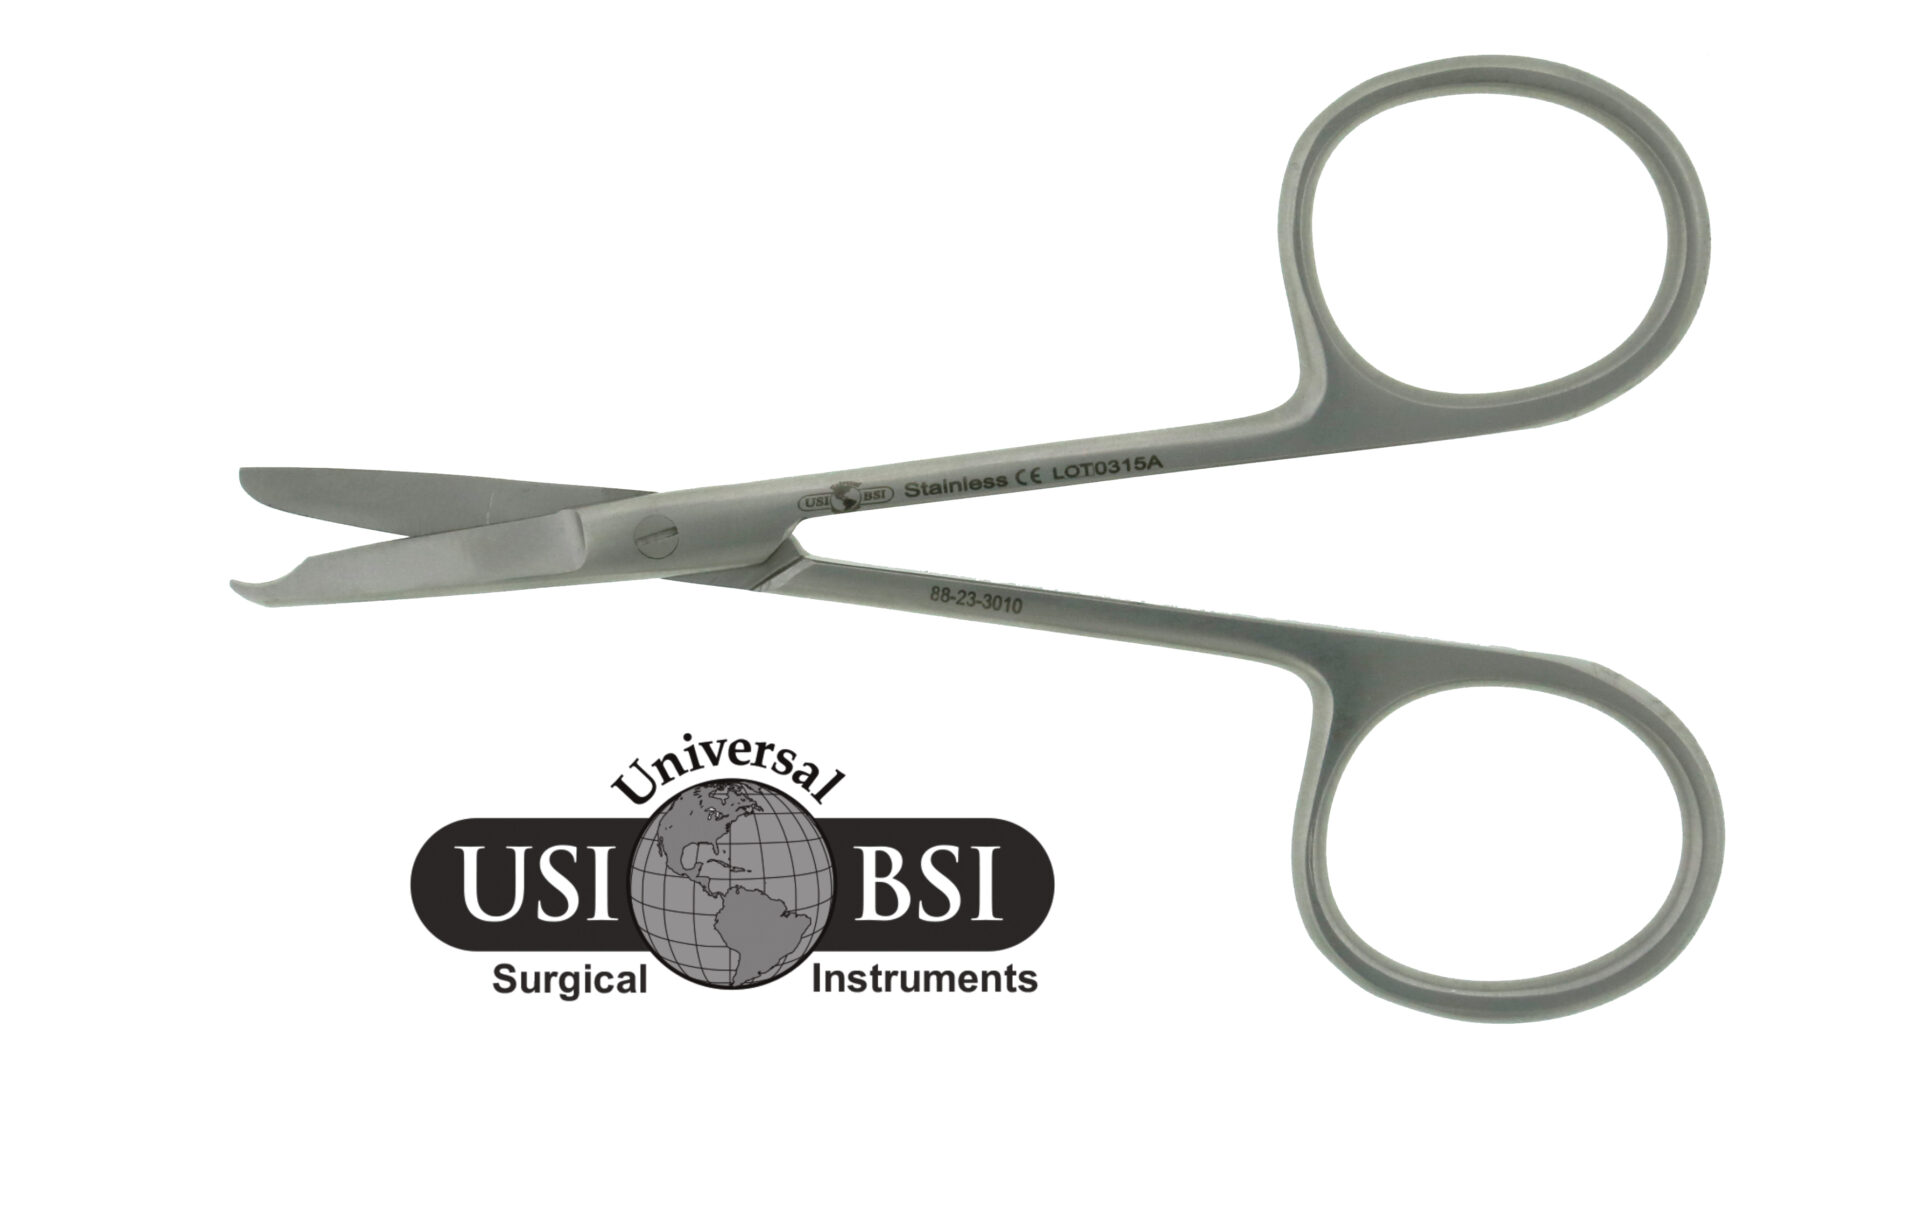 A pair of scissors with the us surgical instruments logo on it.